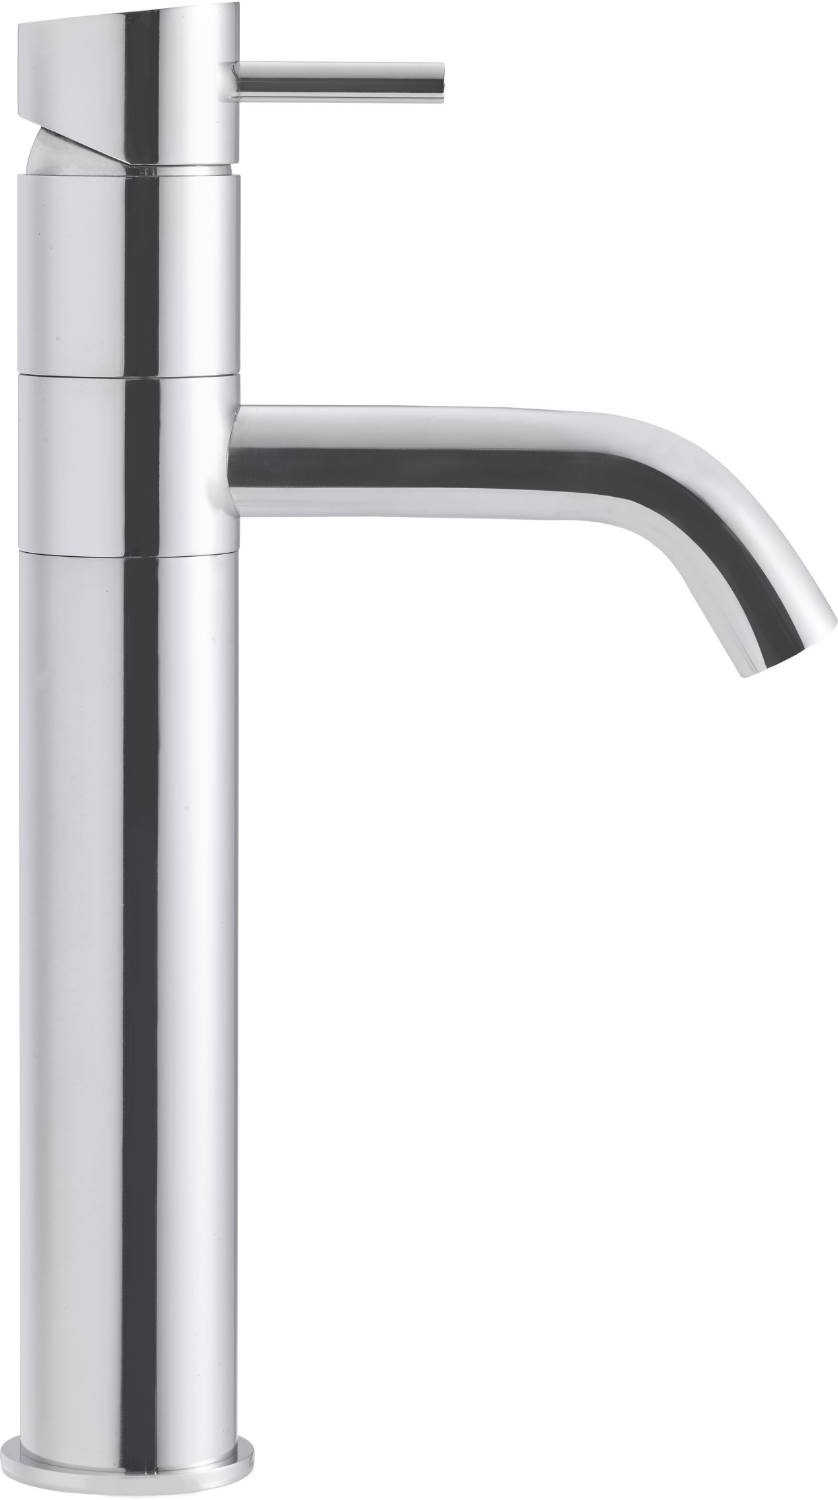 Qtoo collection - QT1200M Tall Single Lever Tap - Tall single lever tap